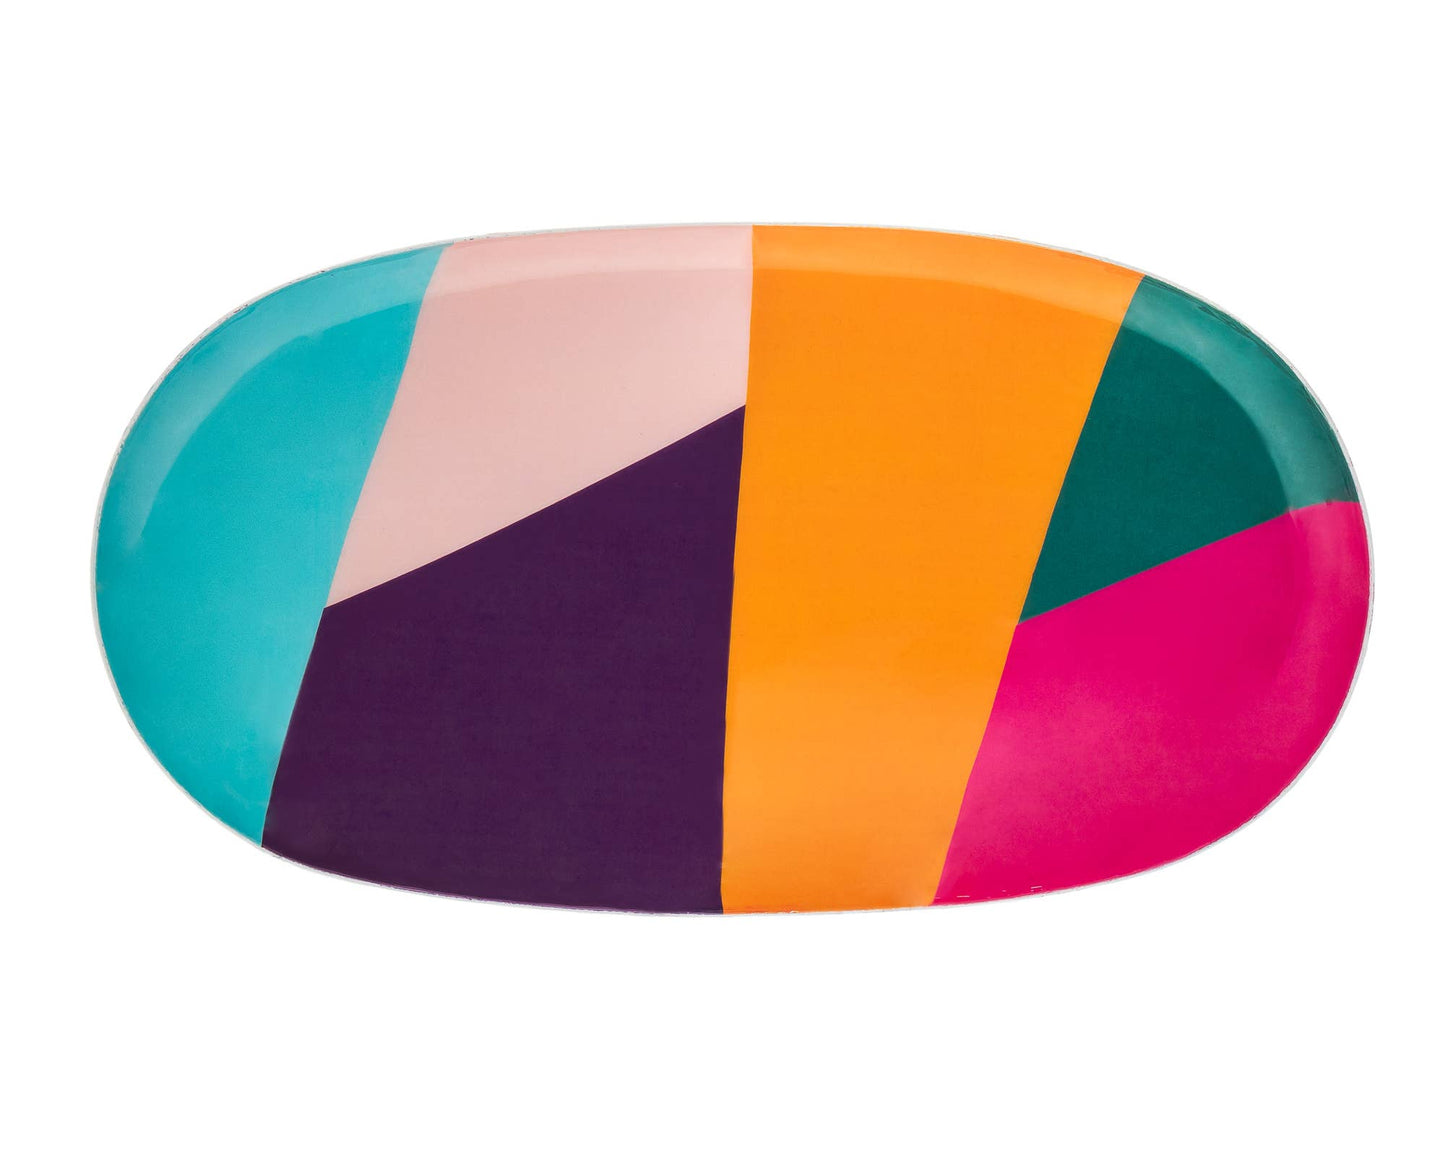 Colorful Serving Tray Large